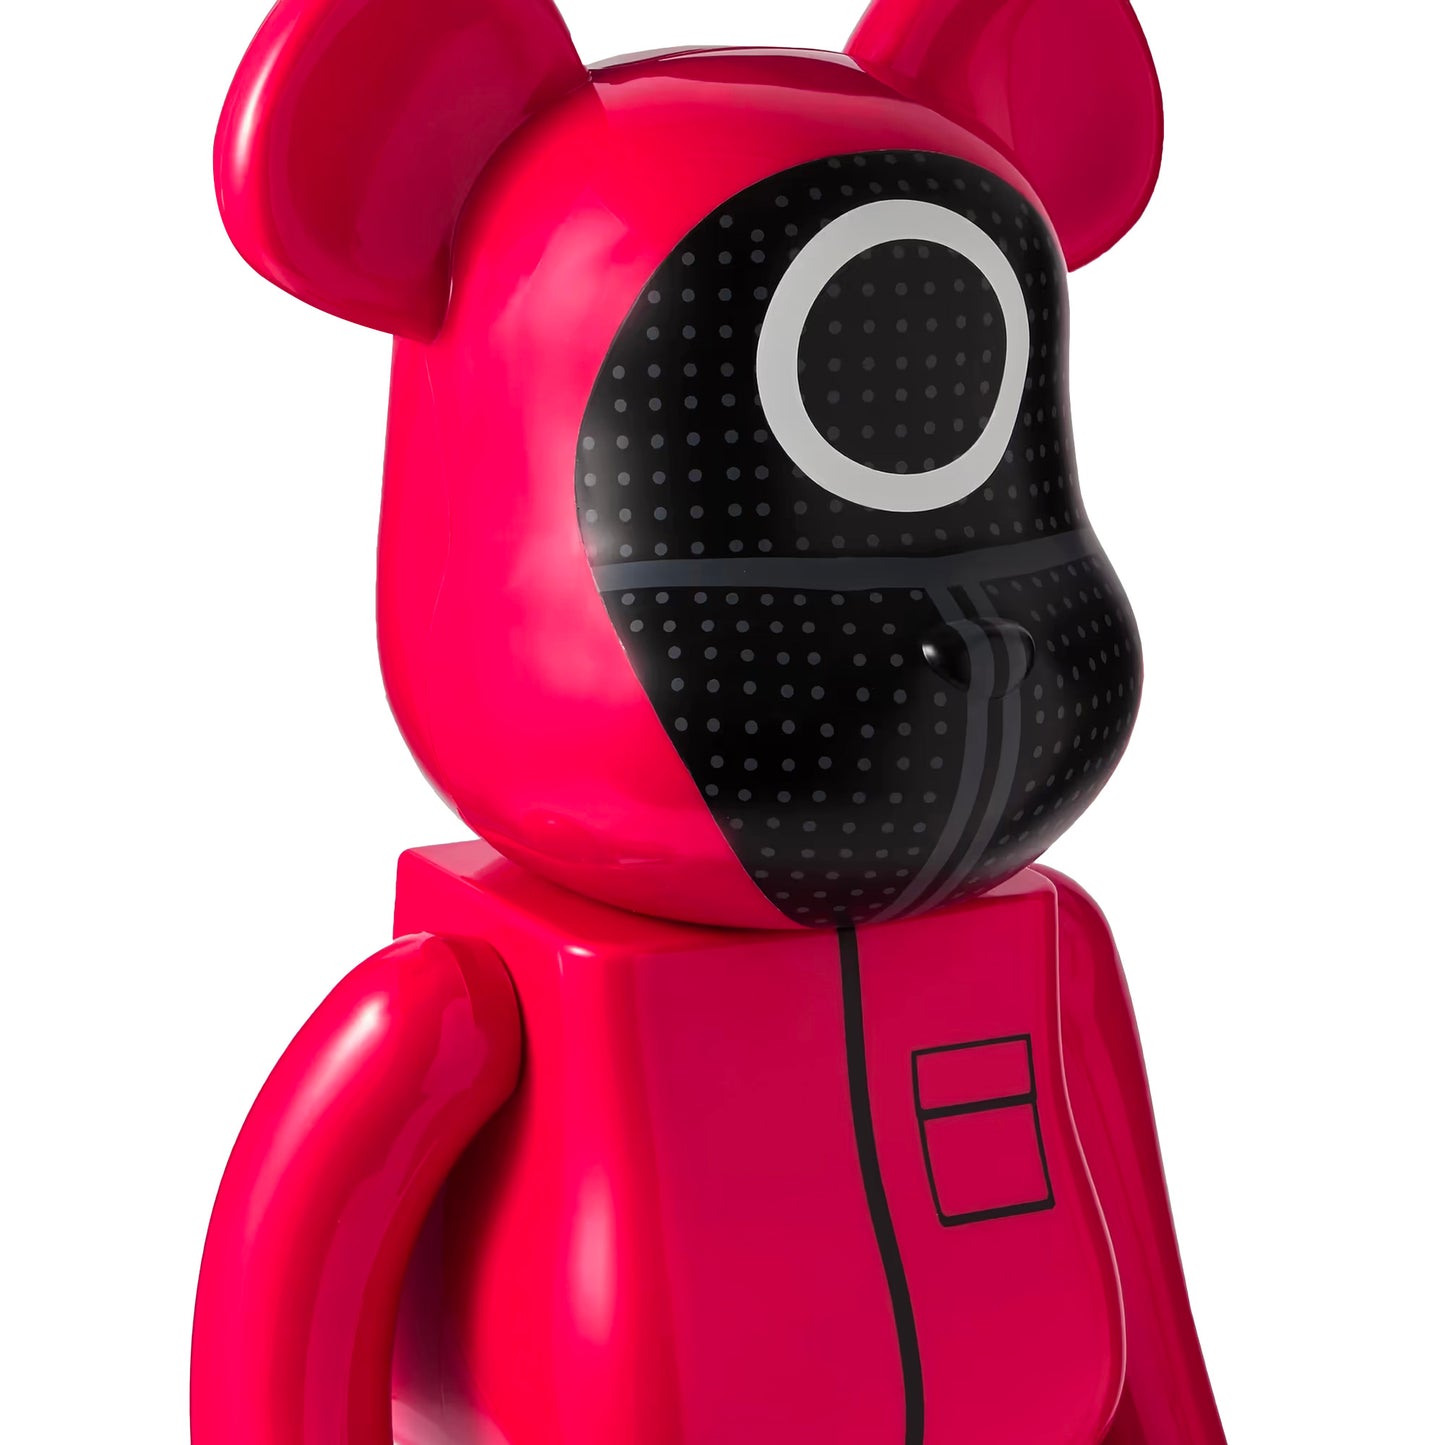 MEDICOM TOY: BAGS AND ACCESSORIES, MEDICOM TOY BEARBRICK SQUID GAME 1000%